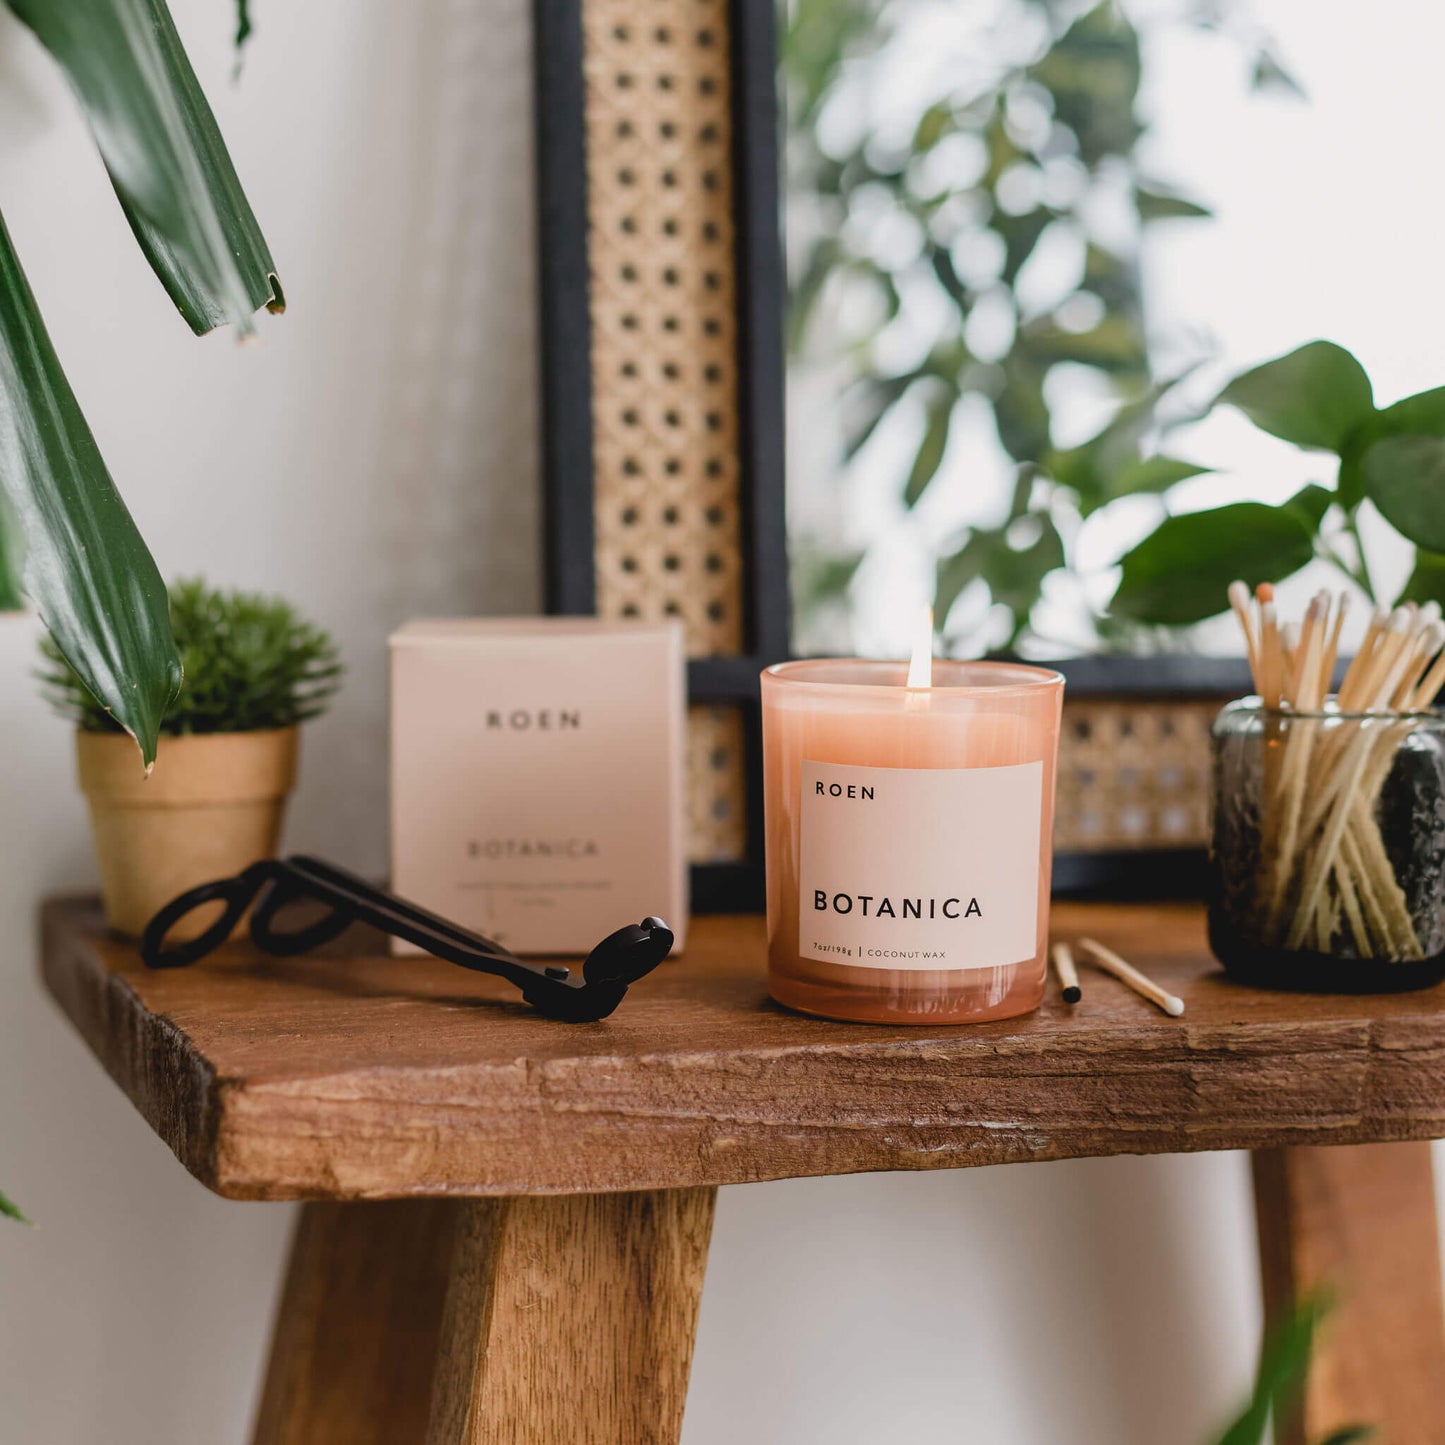 R O E N Botanica Scented Candle - Osmology Scented Candles & Home Fragrance